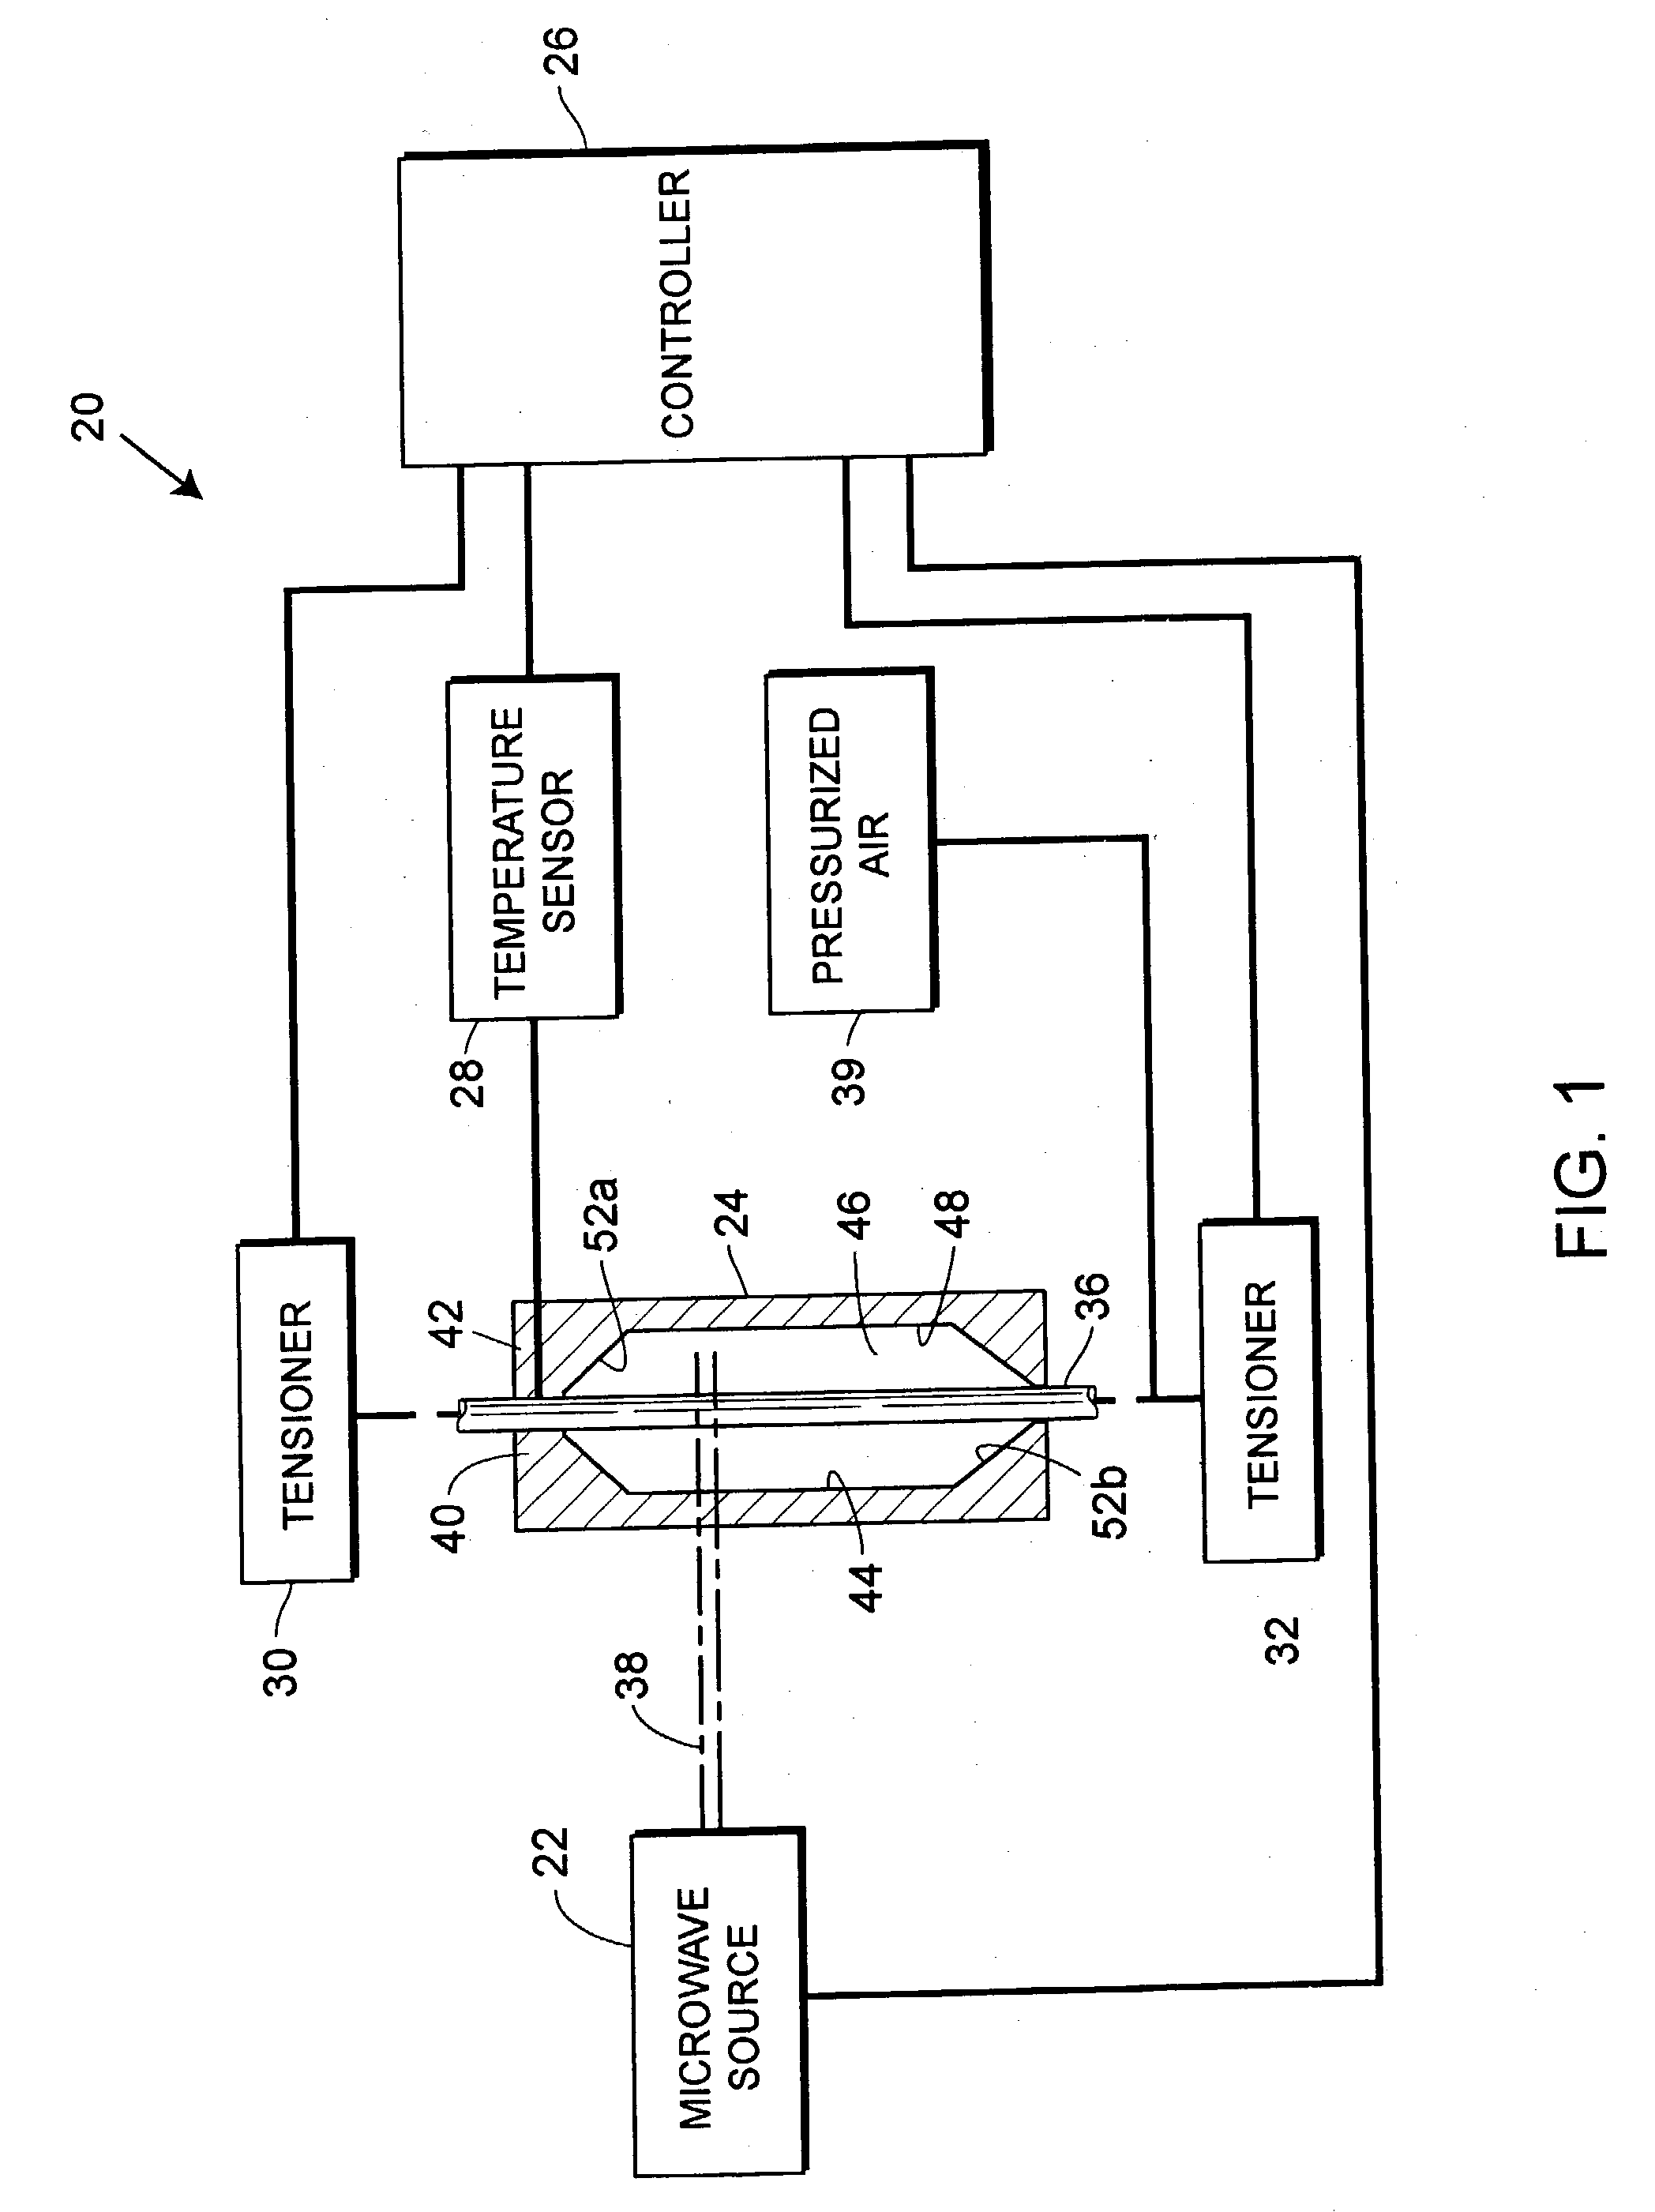 Method and apparatus for extruding polymers employing microwave energy